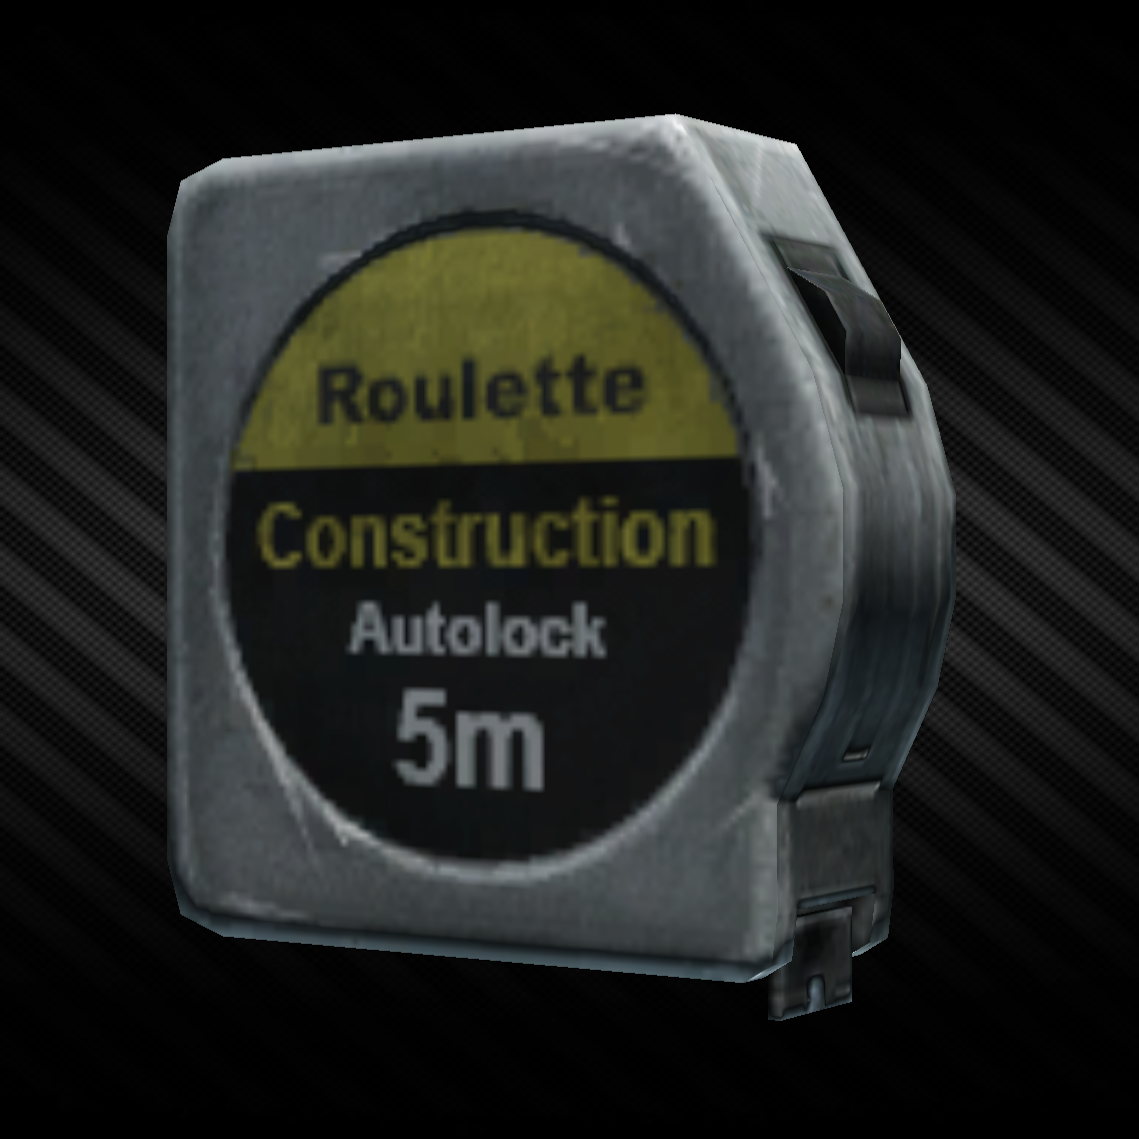 https://static.wikia.nocookie.net/escapefromtarkov_gamepedia/images/e/ea/Construction_Measuring_Tape.png/revision/latest?cb=20200624113146